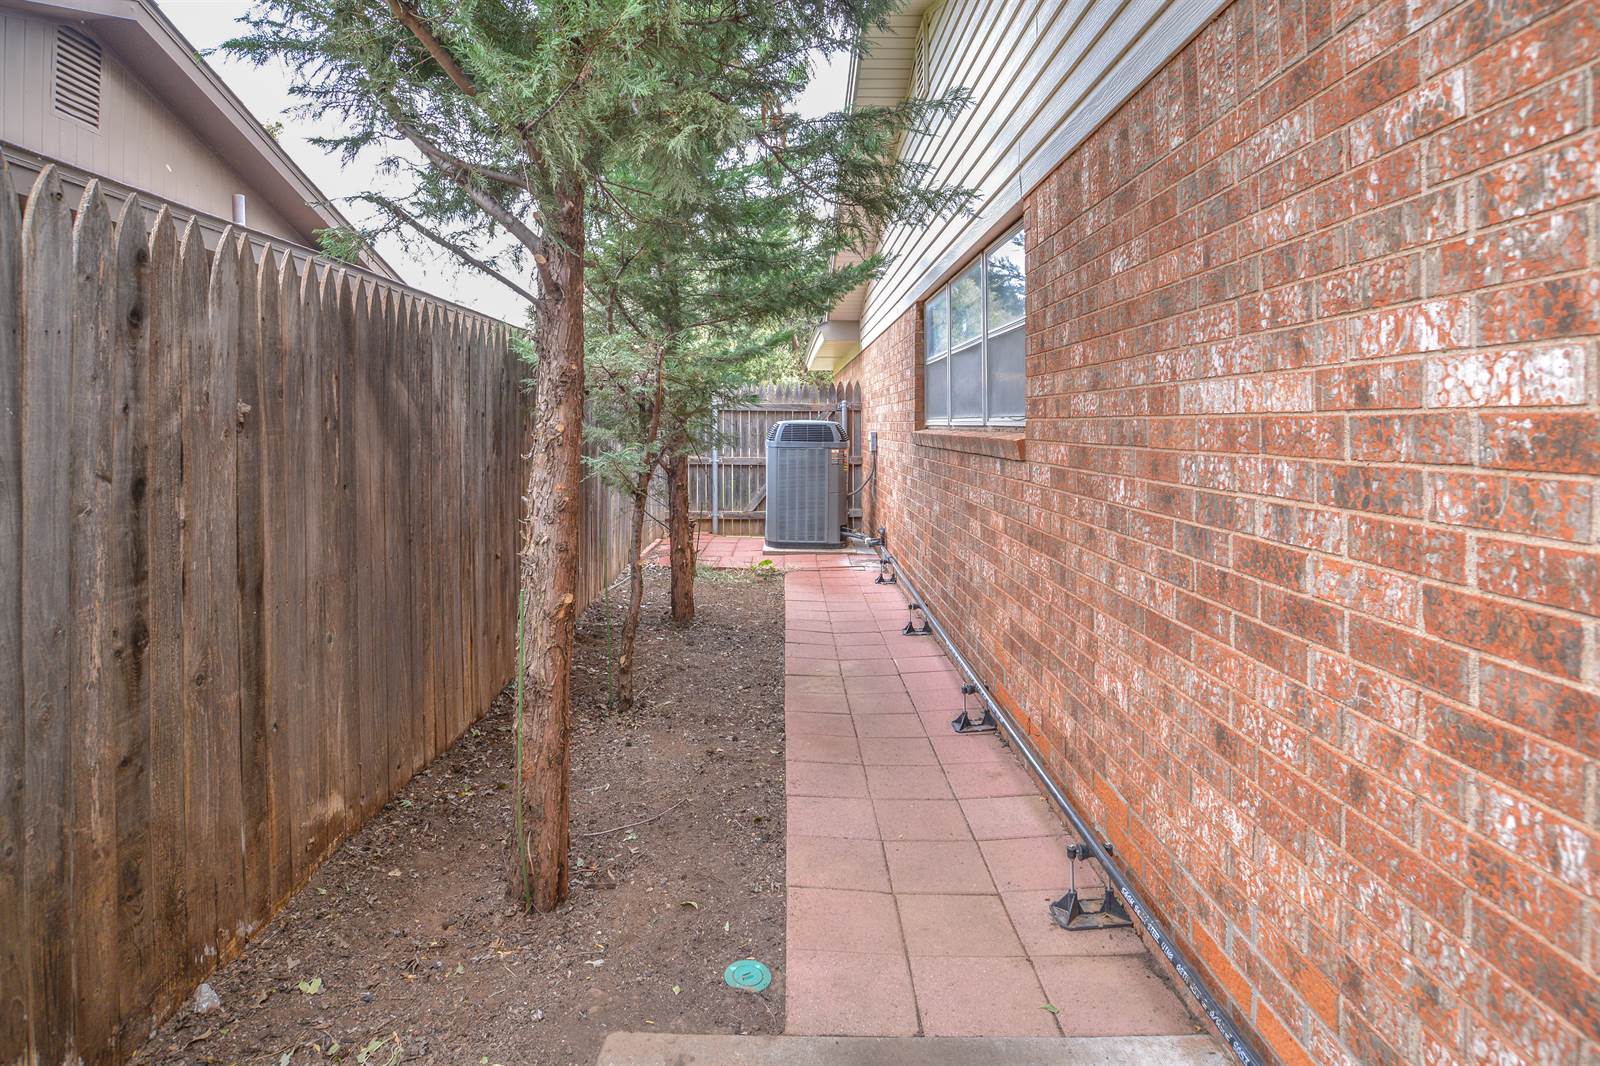 2619 74th Place, Lubbock, TX 79423